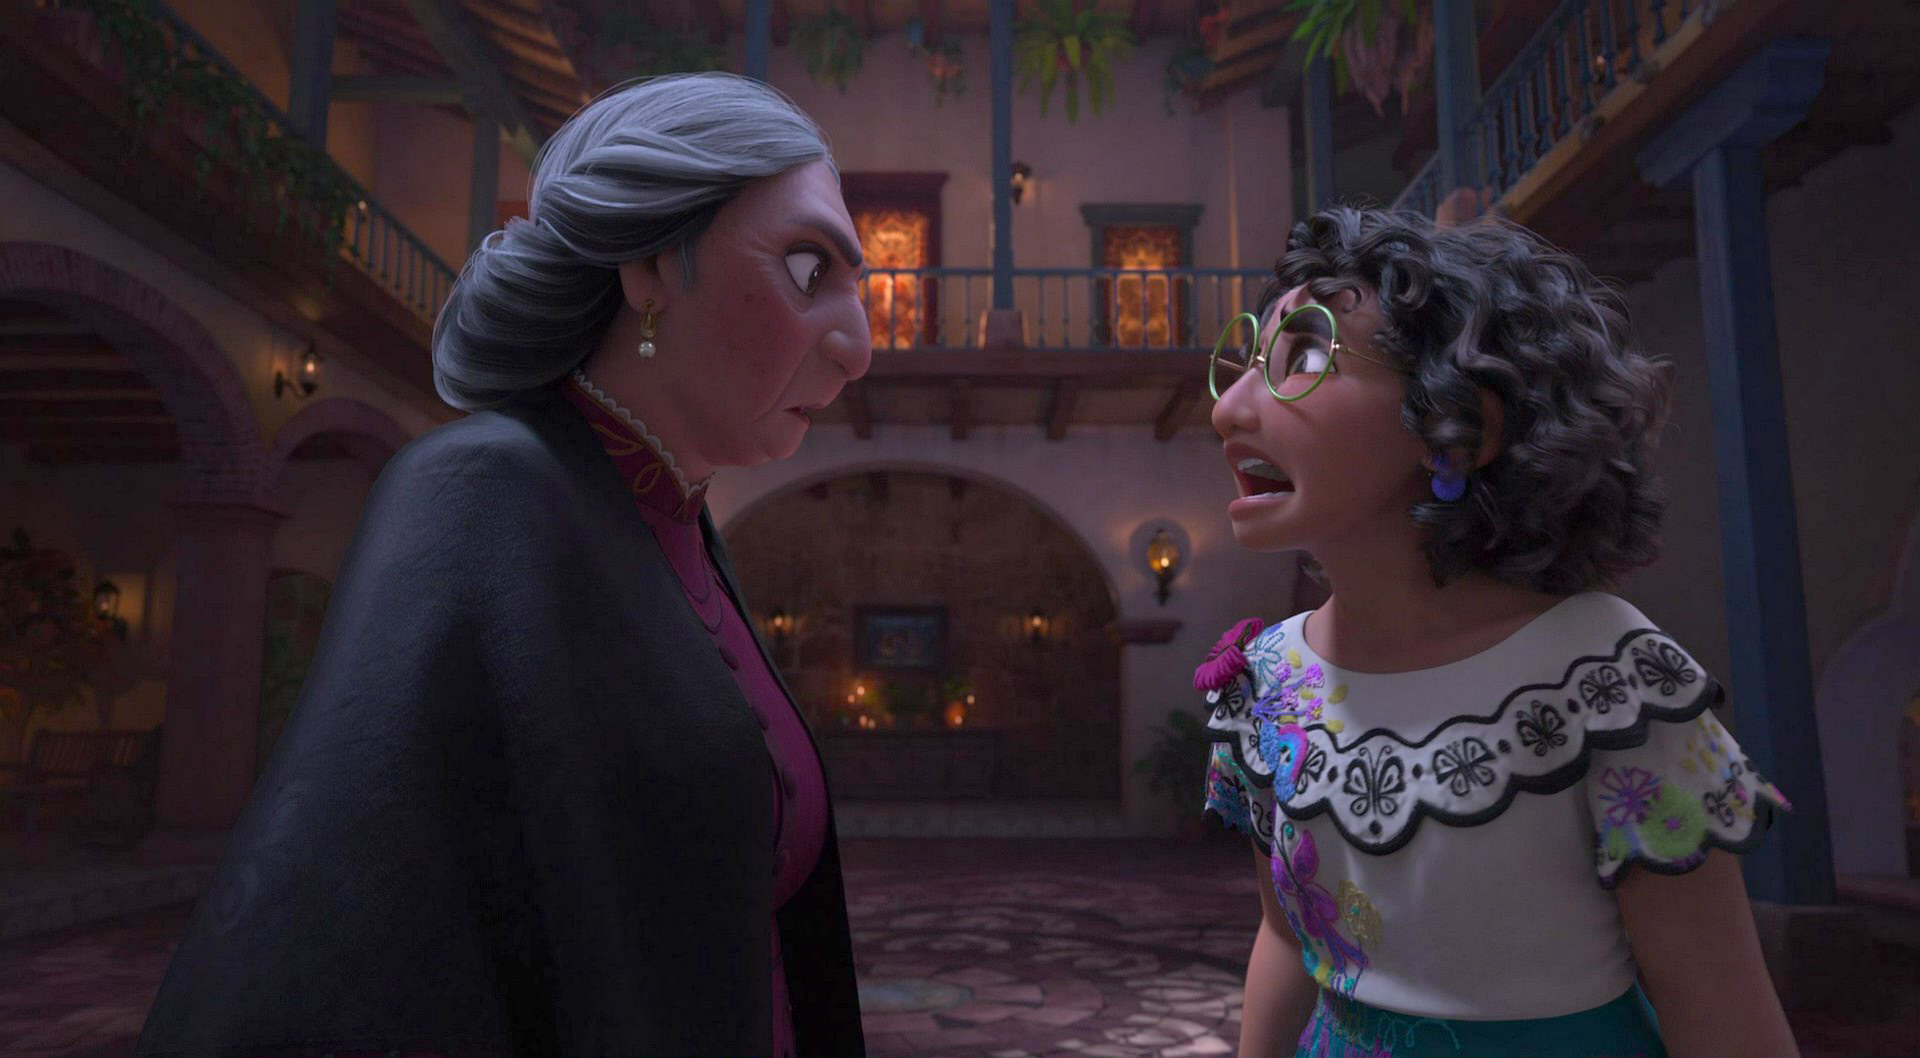 Mirabel arguing with her abuela in their home